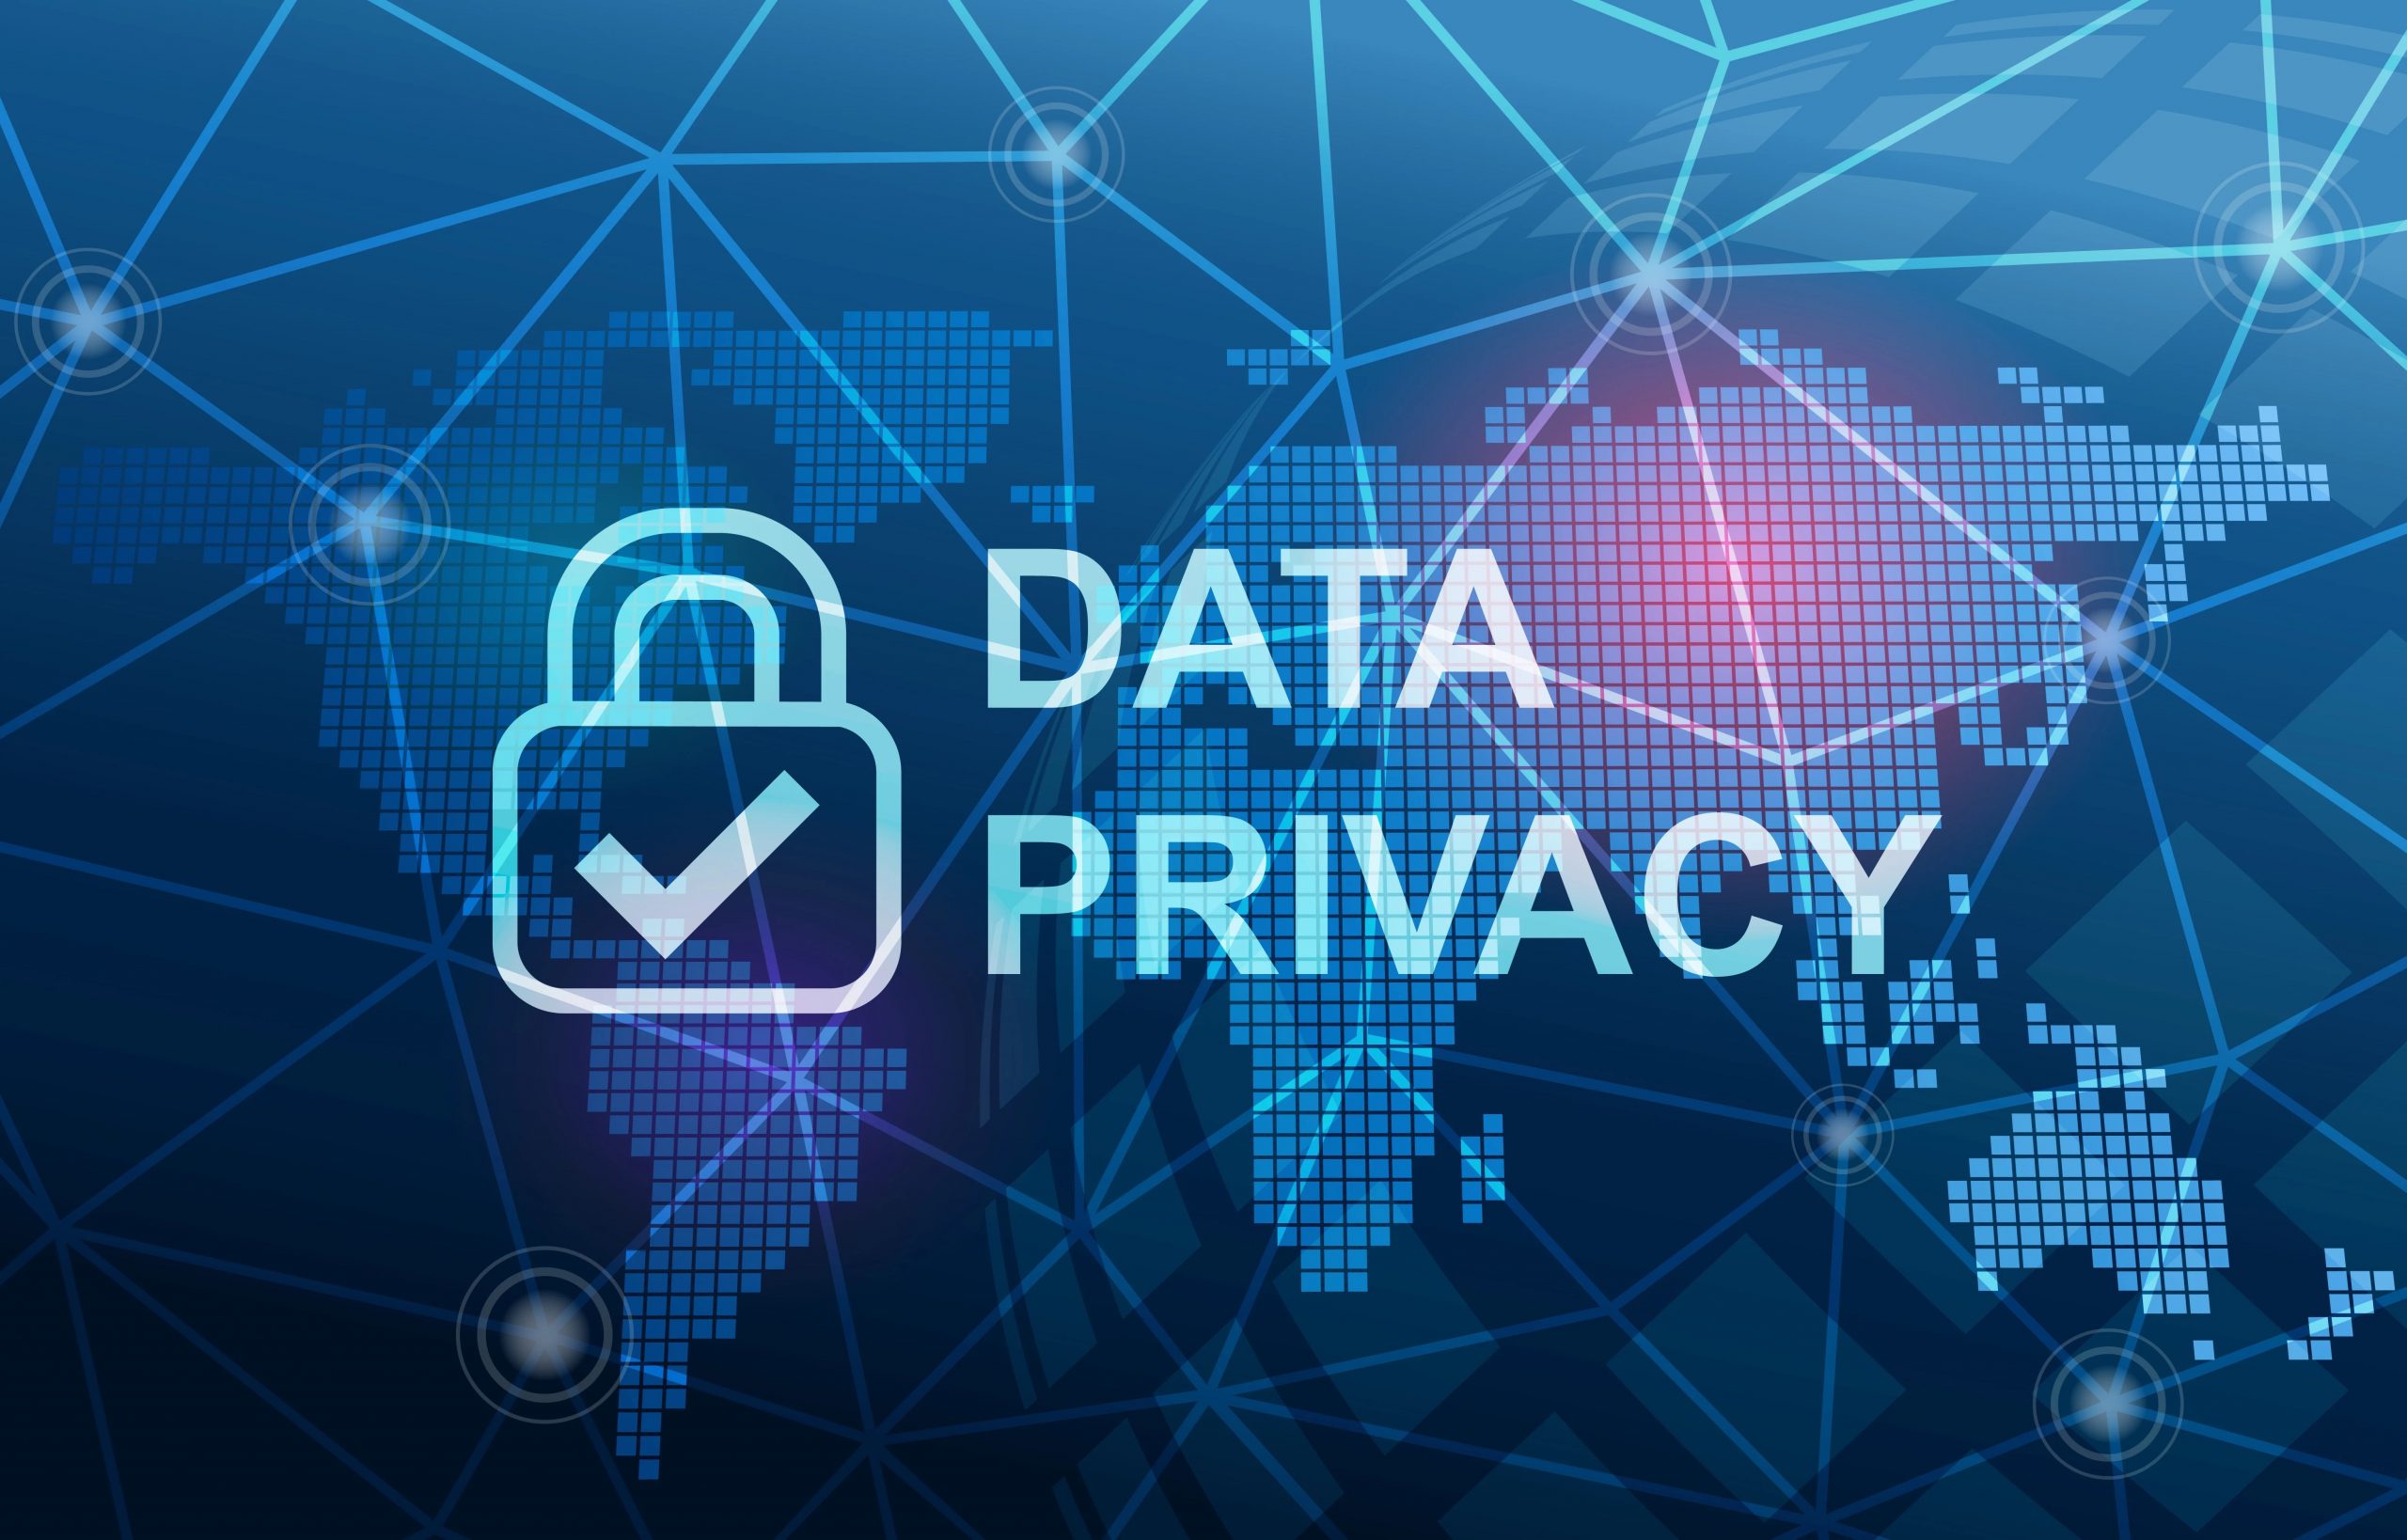 Photo via https://www.cyberark.com/resources/blog/data-privacy-day-data-protection-lessons-from-the-2010s